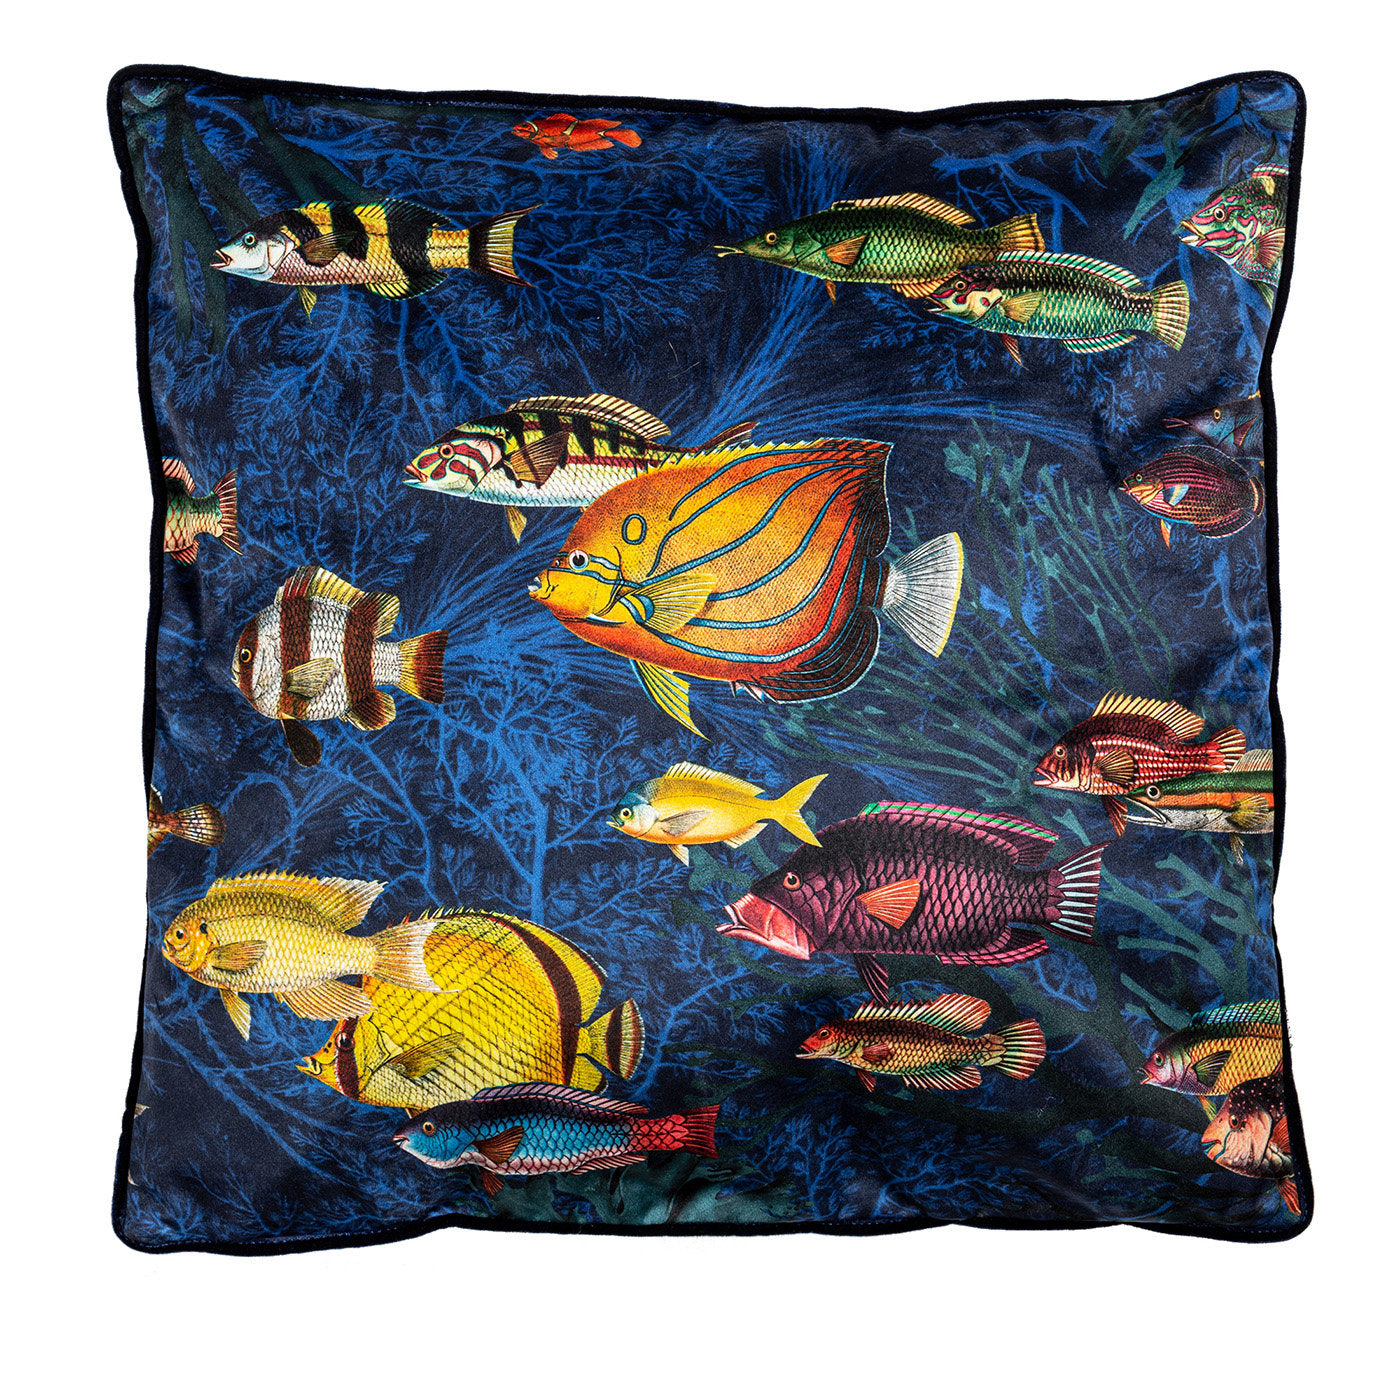 Amami Islands Velvet Cushion With Tropical Fish #2 - Main view